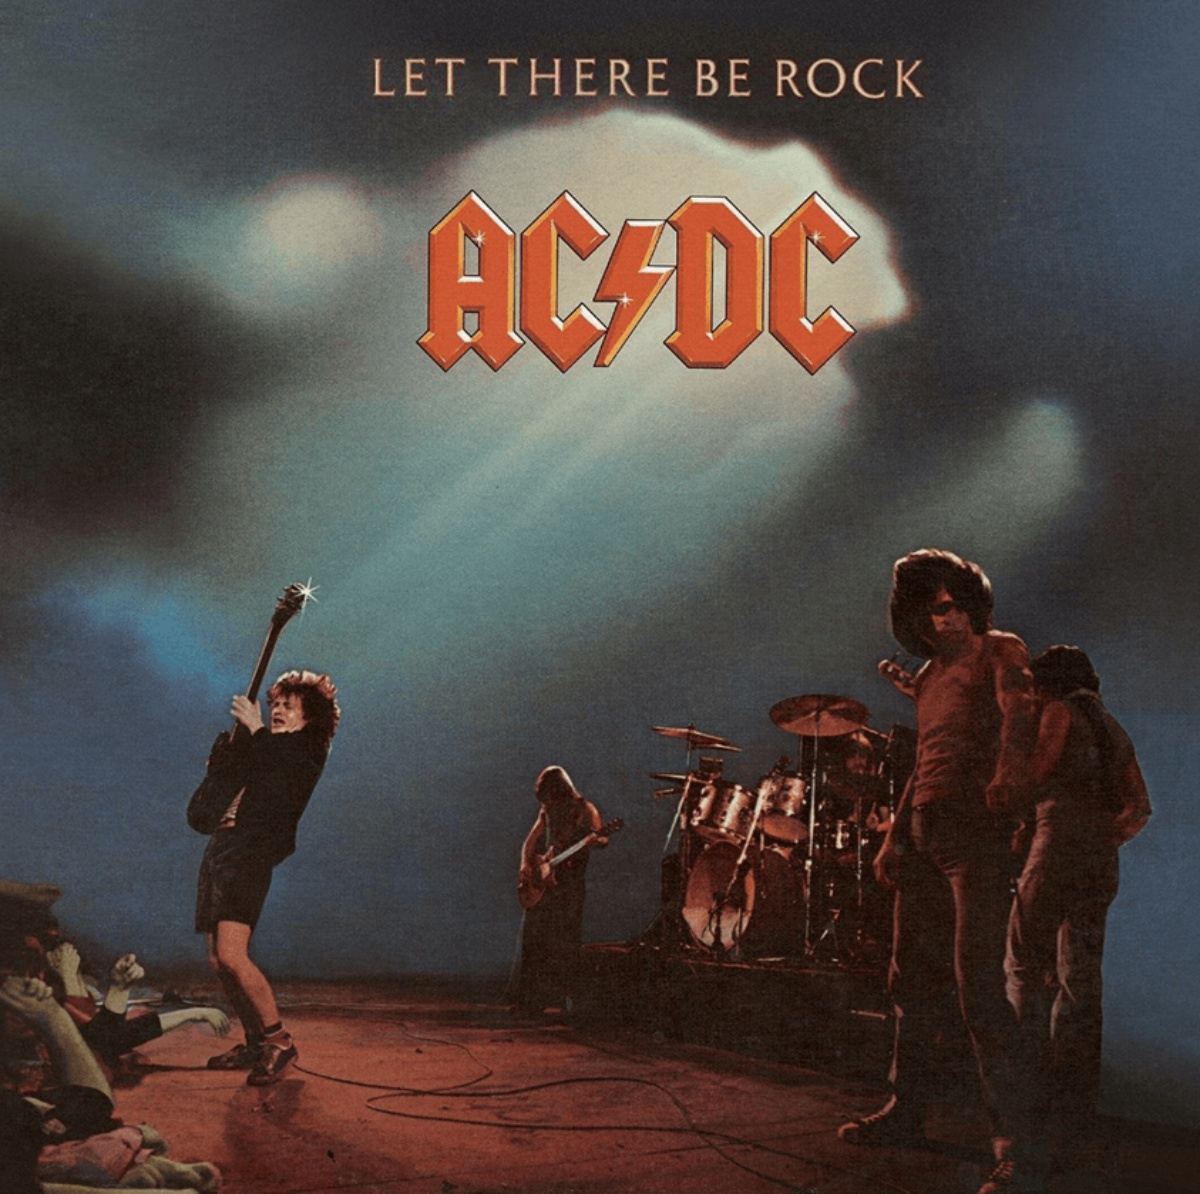 Capa do álbum "Let There Be Rock" do AC/DC